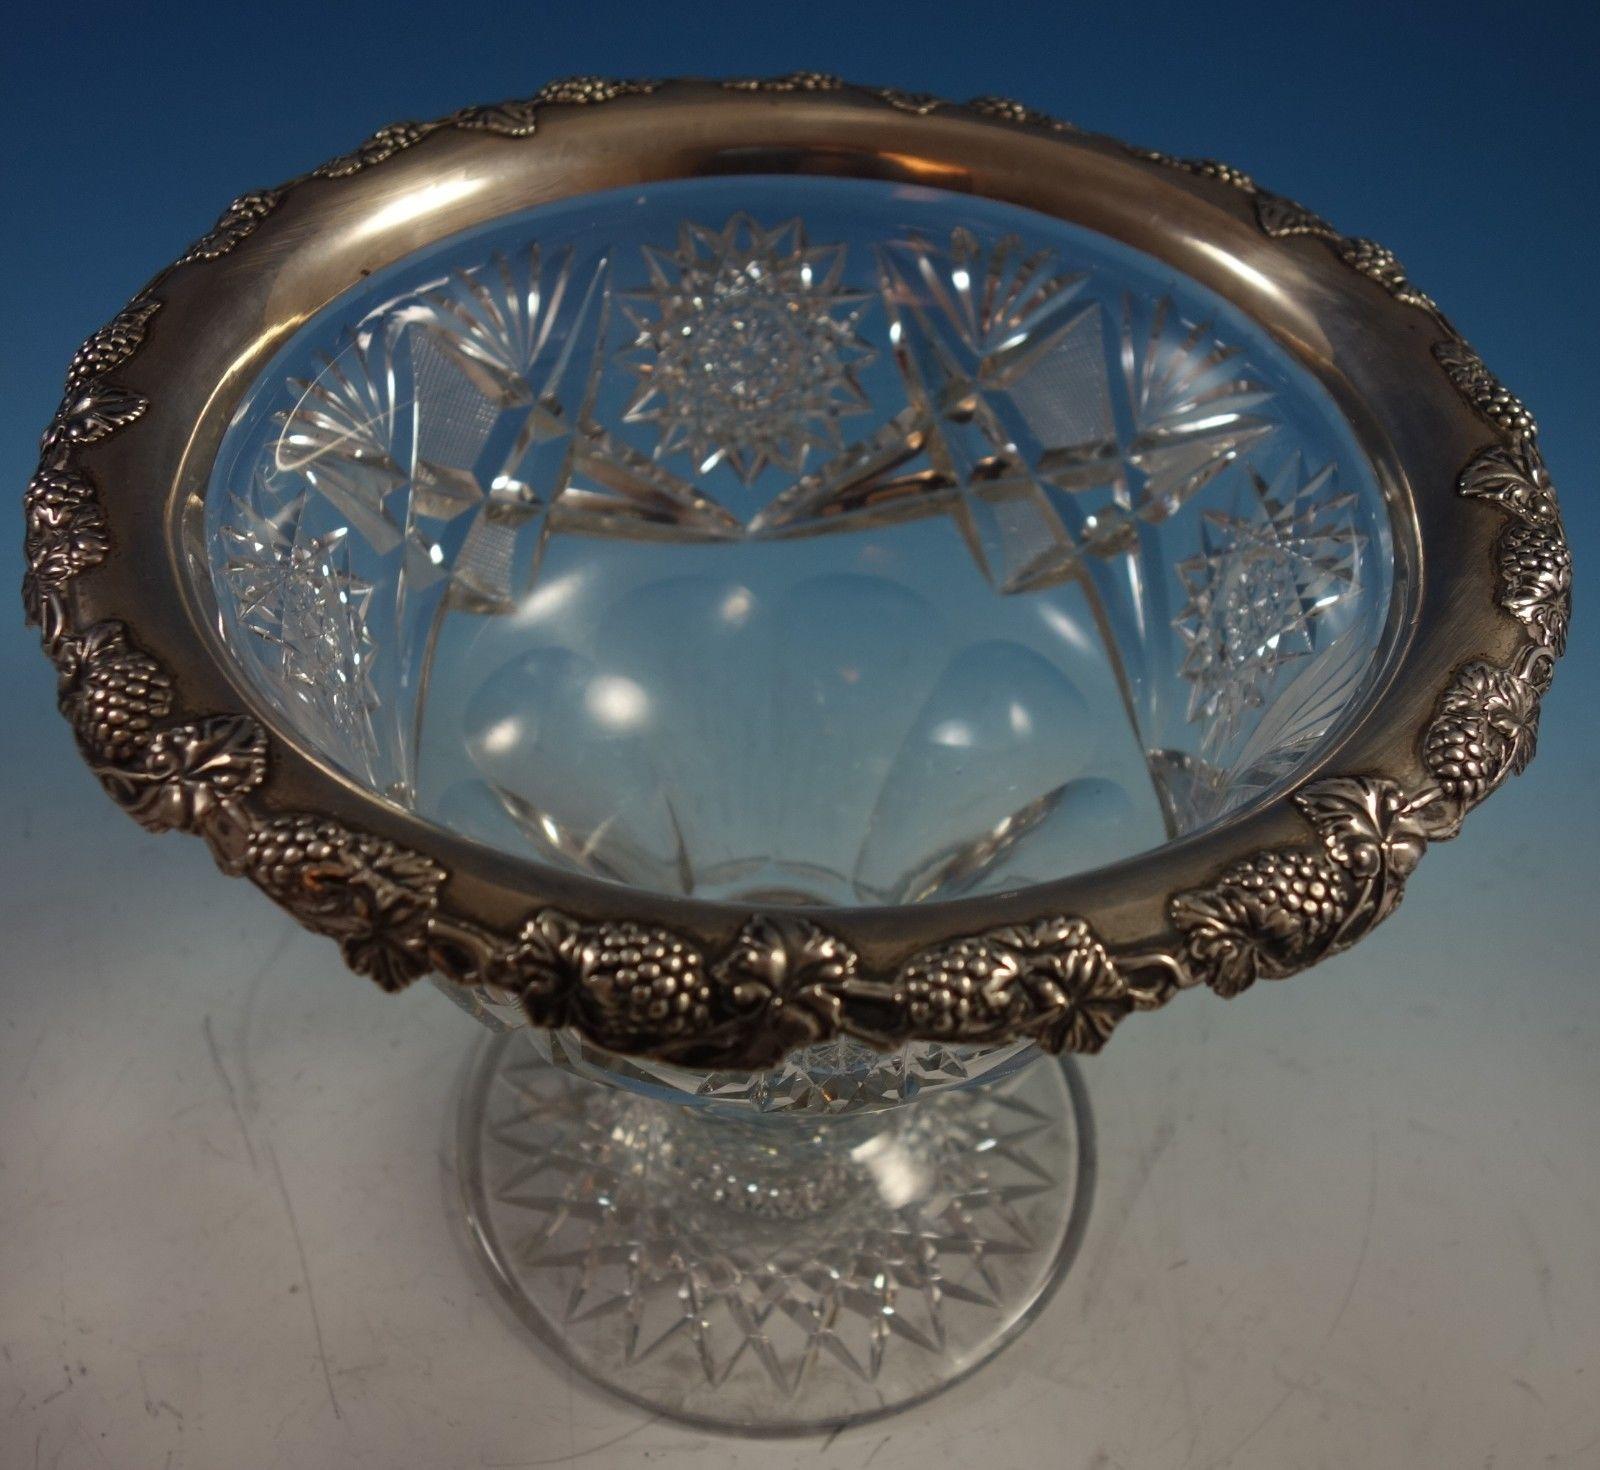 Impressive Wilcox Co. punch bowl made of cut glass with a sterling silver rim that features grapes and grape leaves. The bowl measures 8 1/2